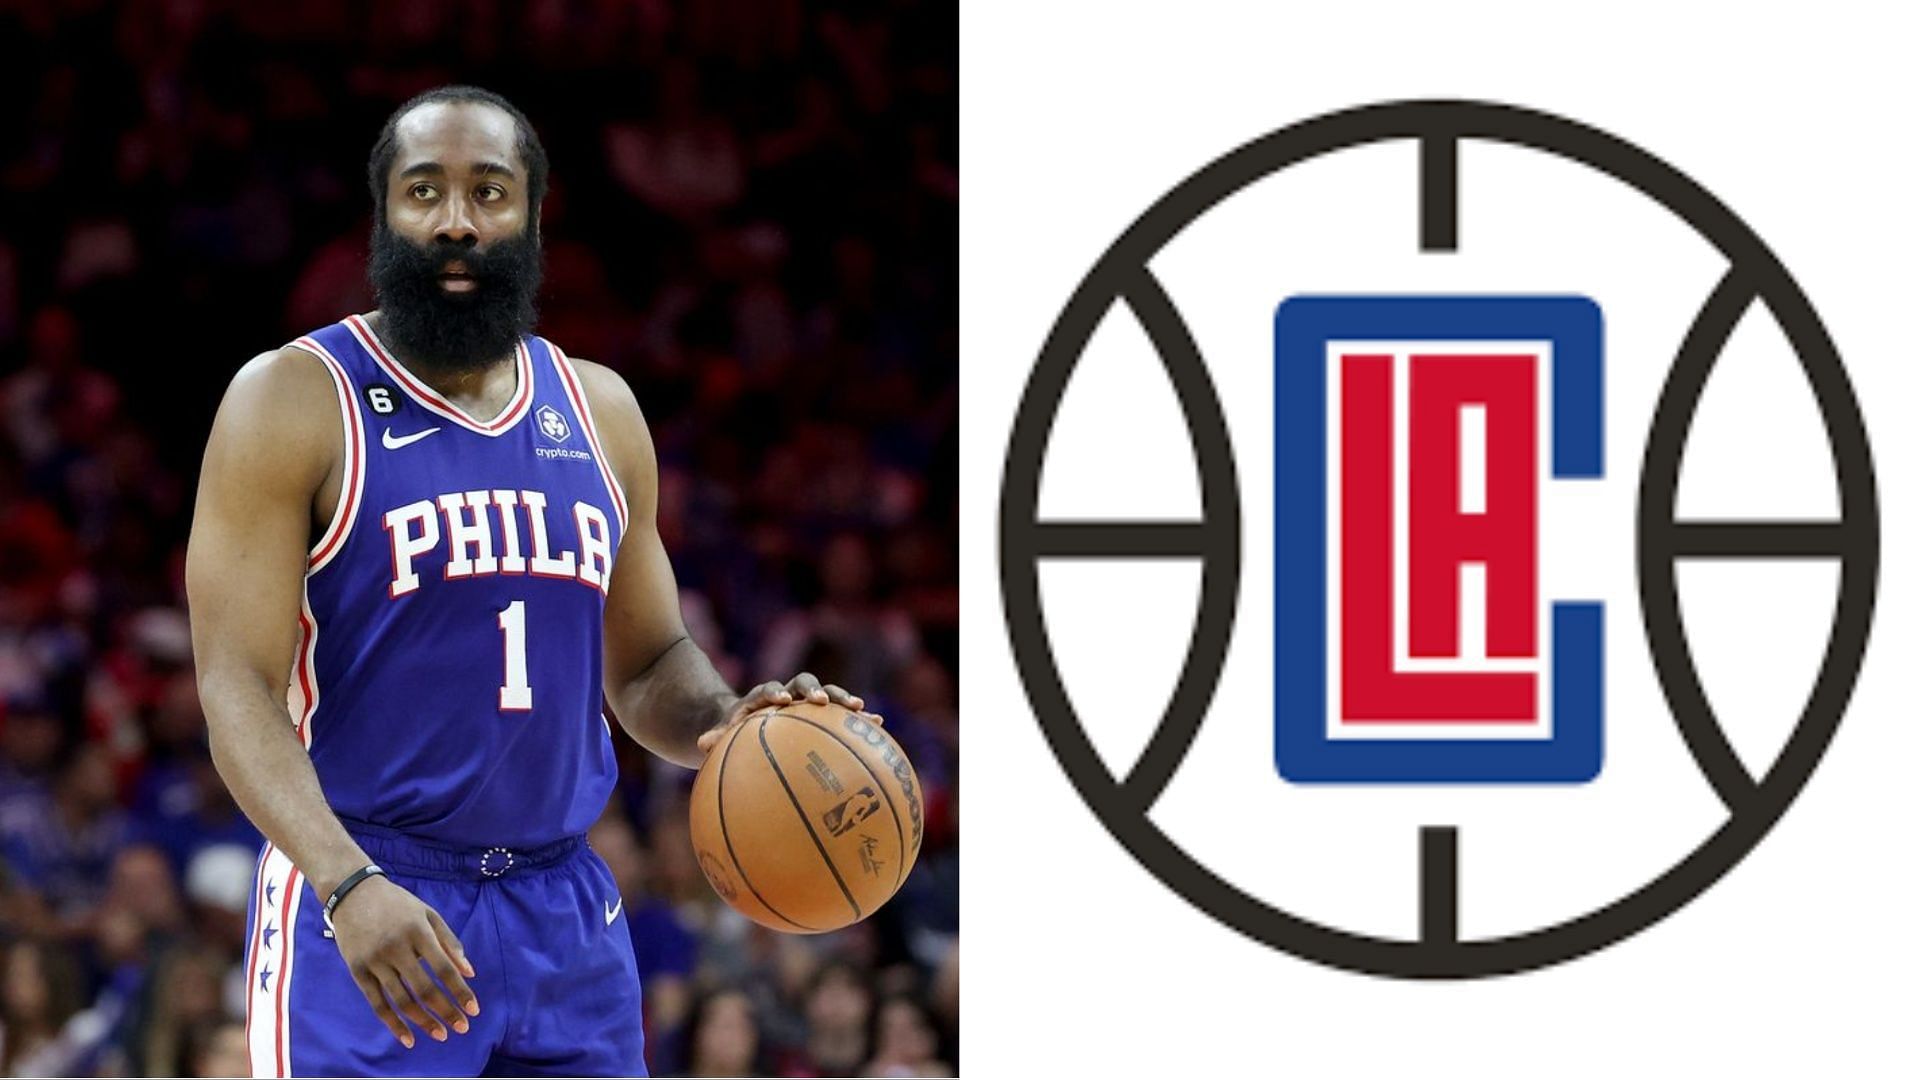 LA Clippers are still trying to trade for James Harden